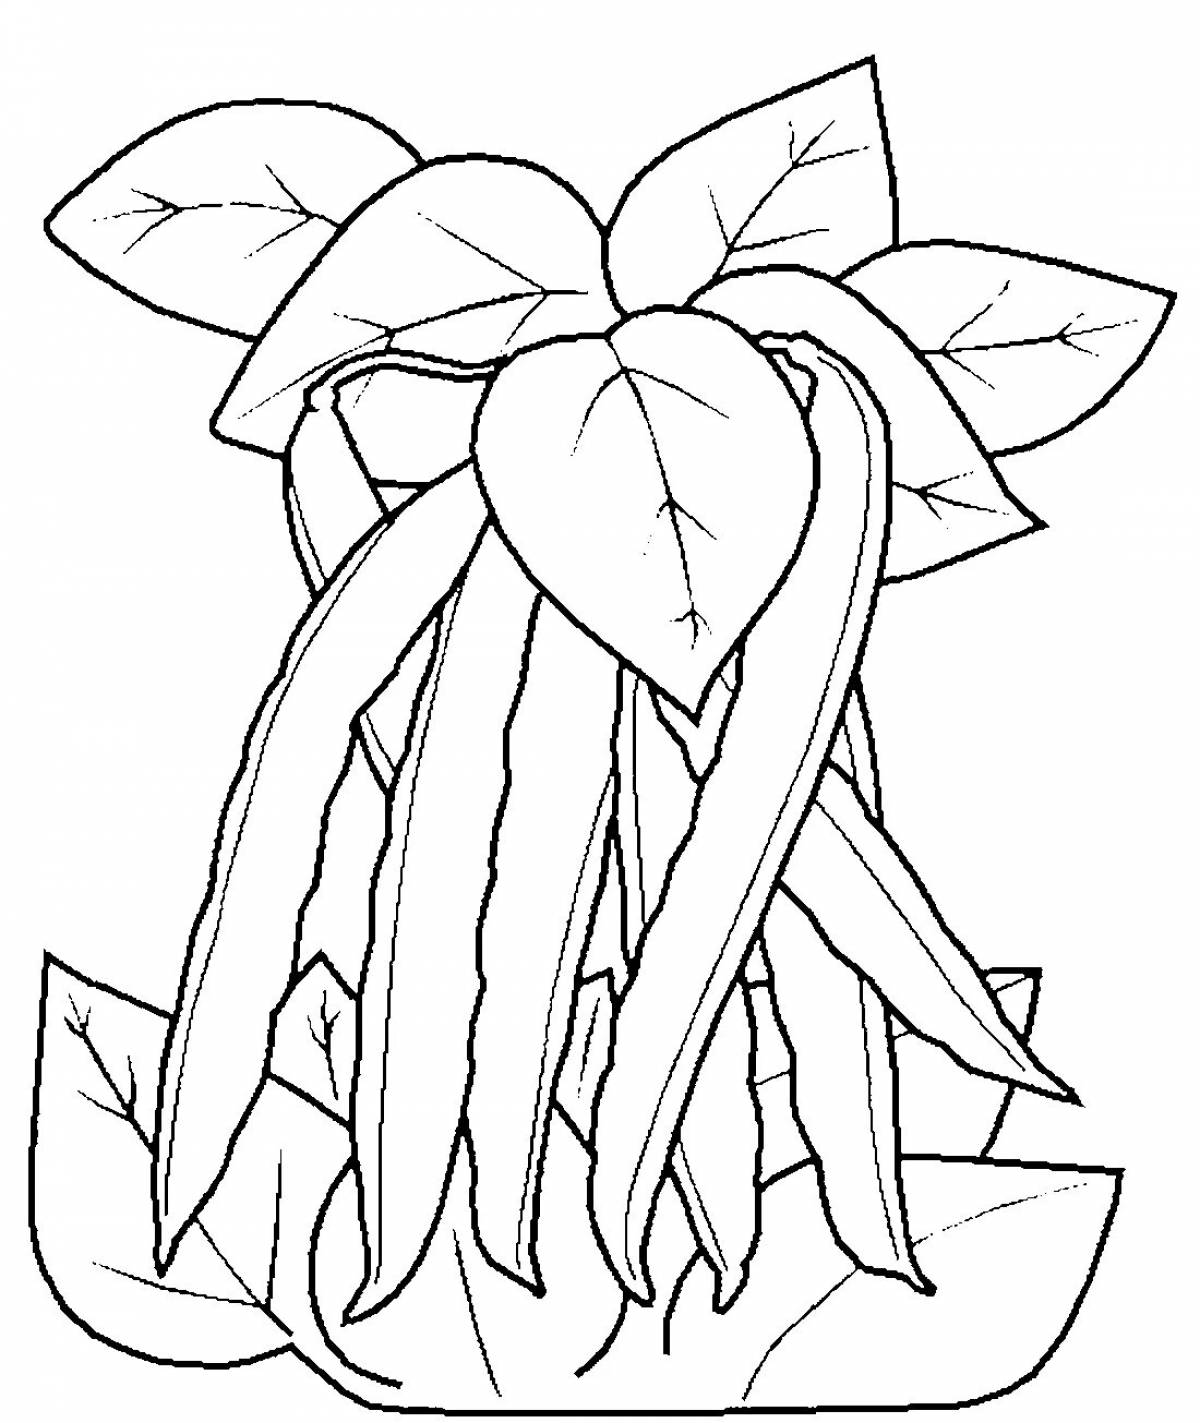 Sweet bean coloring page for beginners